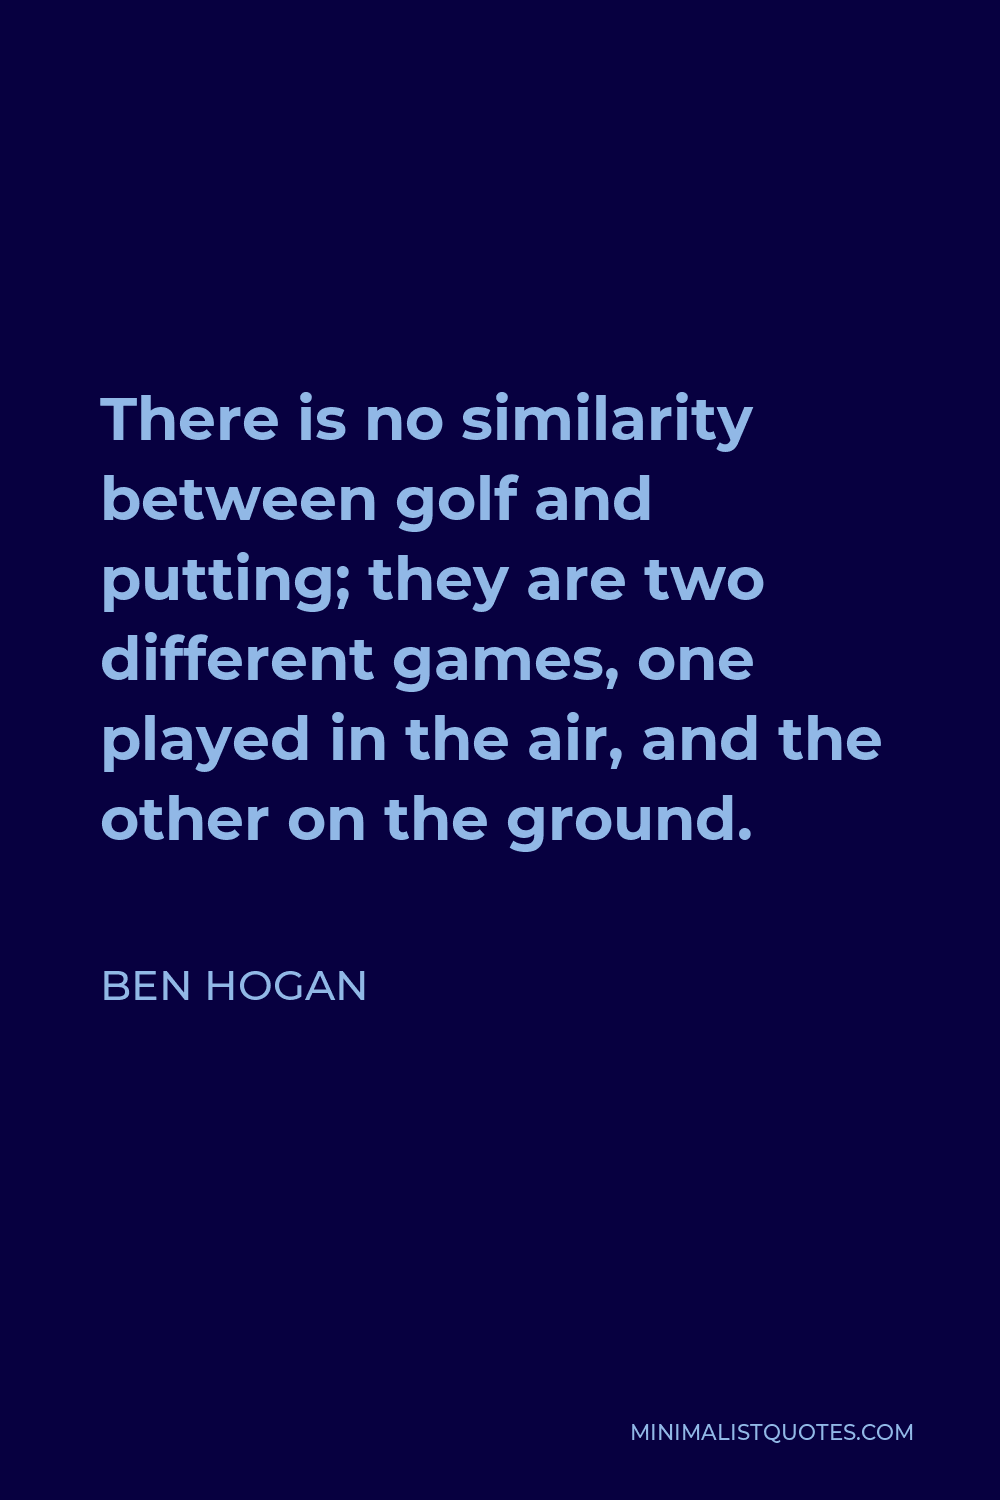 Ben Hogan Quote - There is no similarity between golf and putting; they are two different games, one played in the air, and the other on the ground.